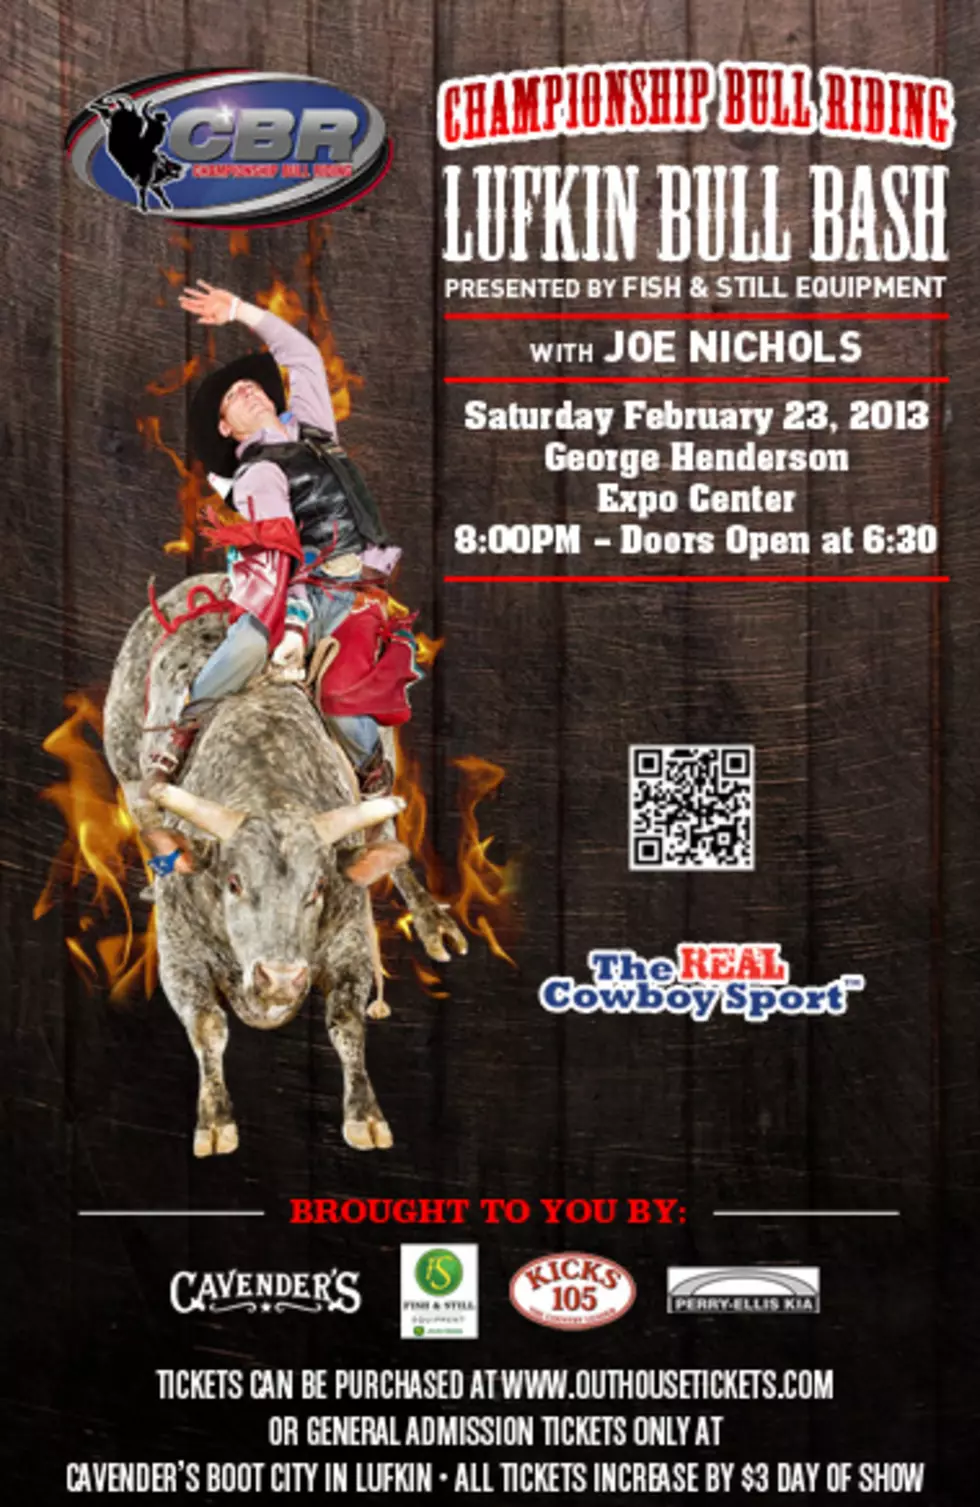 Bull Bash Tickets Available for KICKS VIP Members this Weekend